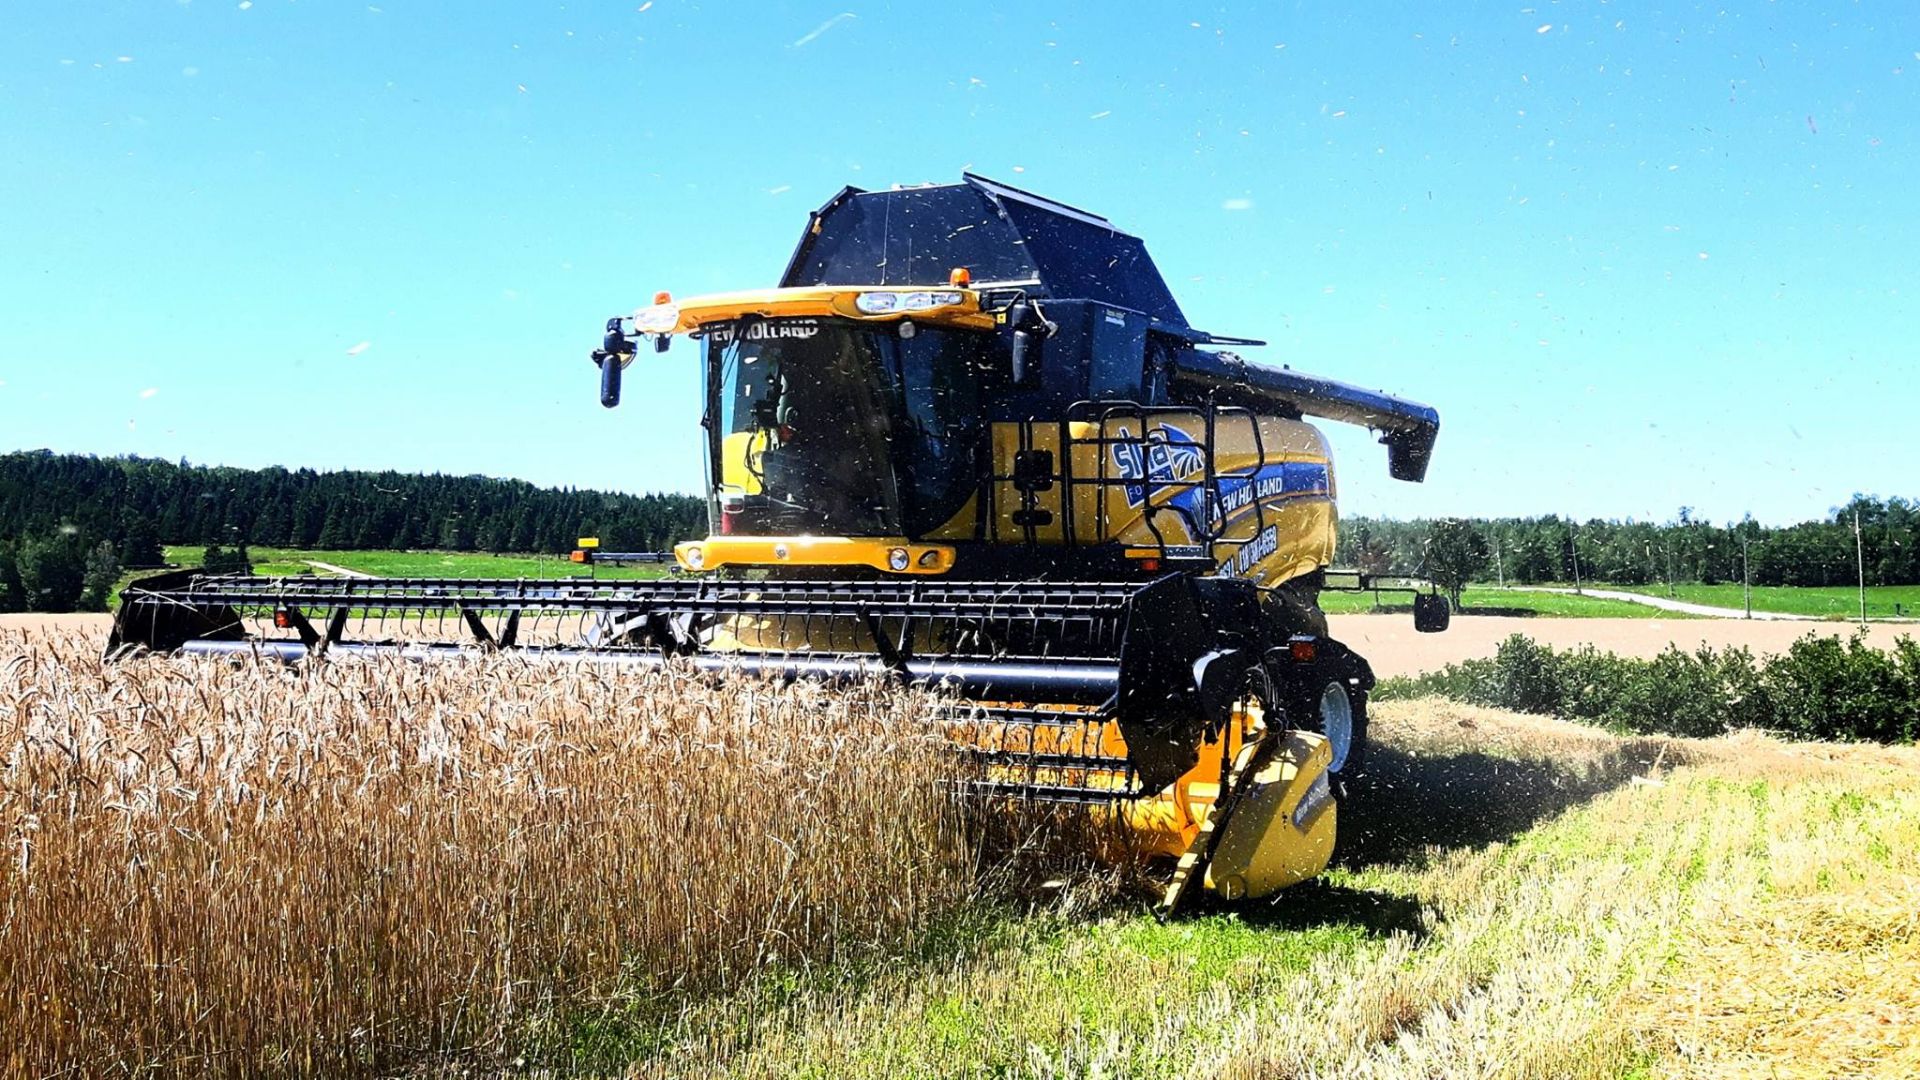 2008 NEW HOLLAND CX8080 Combine Harvester, 4700 Sep.hrs